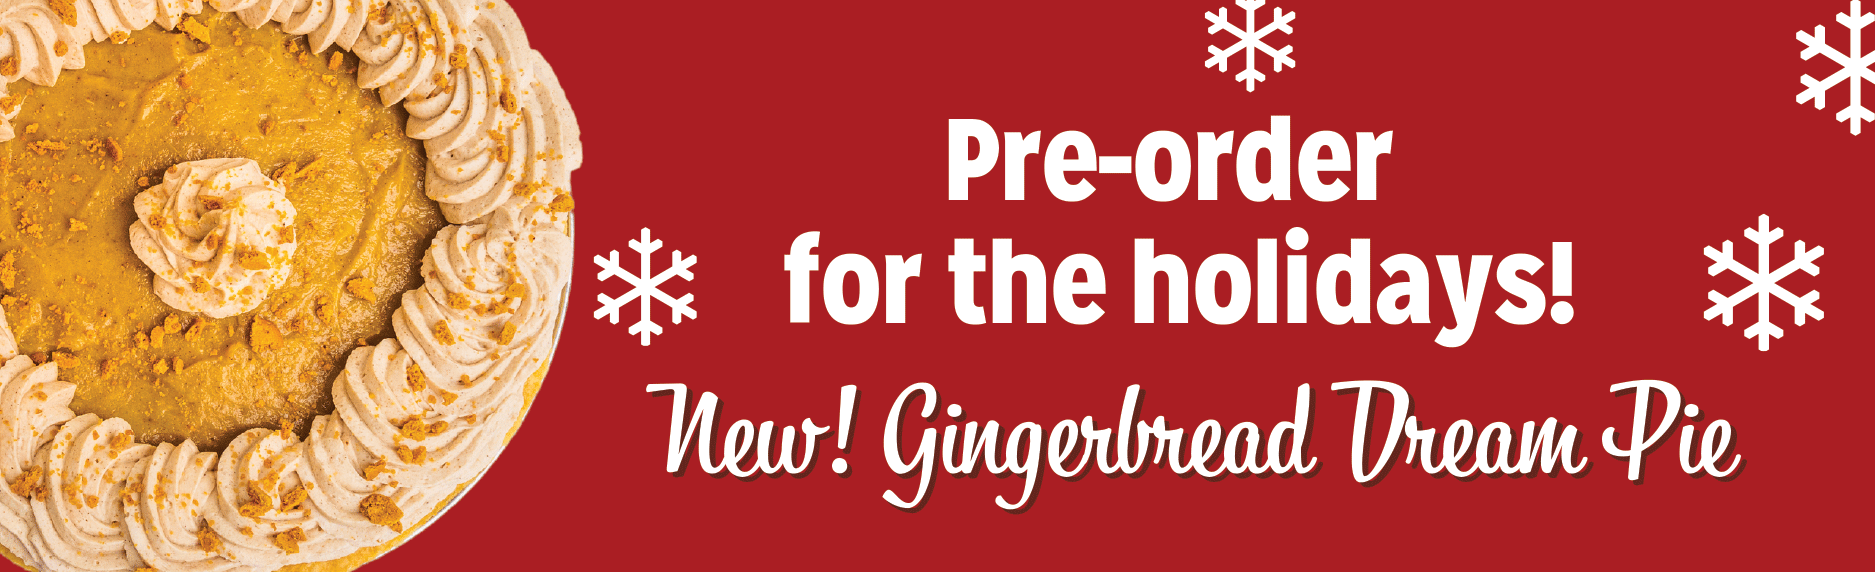 Pre-order for the holidays! New Gingerbread Dream Pie